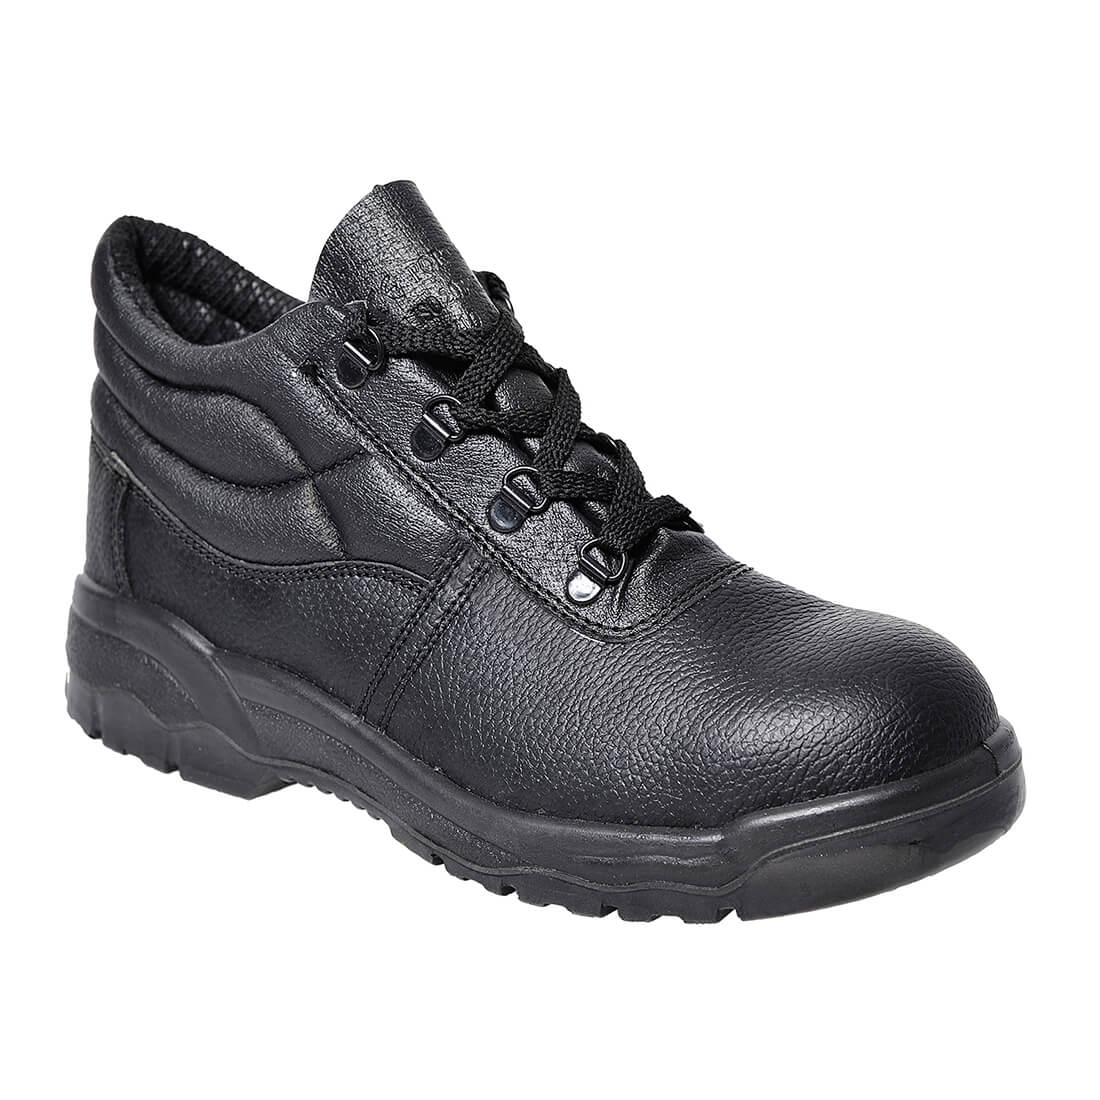 Portwest Steelite S1P Protector Safety Boots Black Size 2